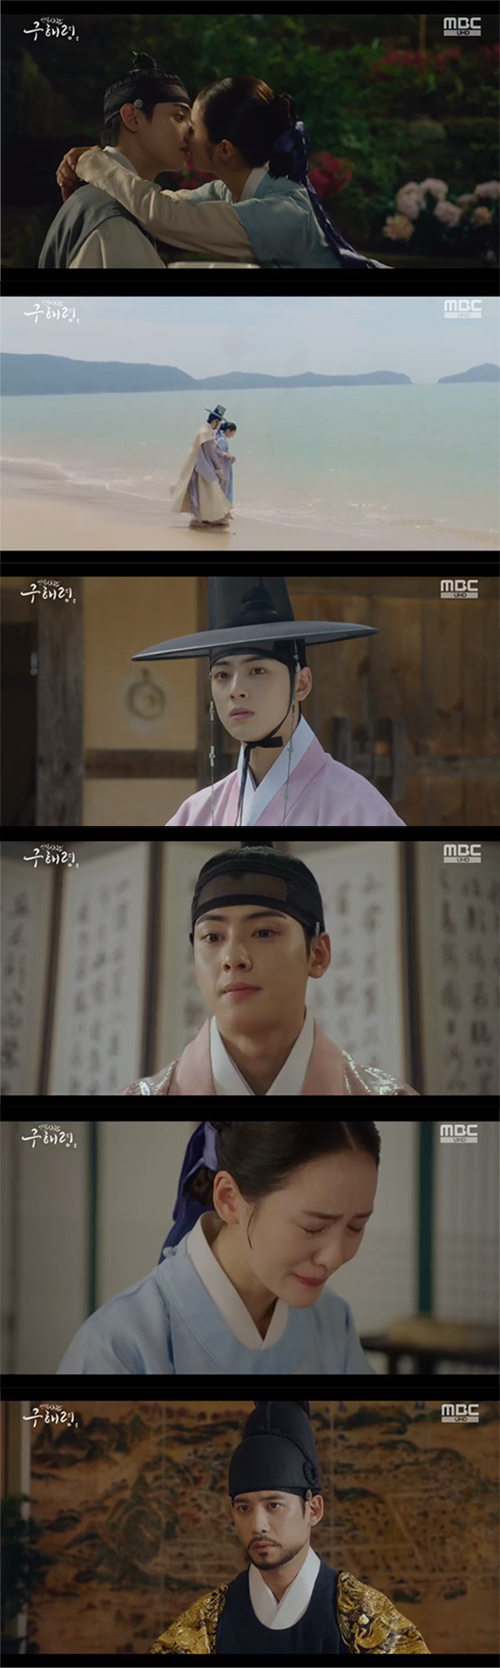 New officer Rookie Historian Goo Hae-ryung Shin Se-kyung pushed Cha Eun-woo outIn MBCWednesday-Thursday evening drama drama The New Entrance Rookie Historian Goo Hae-ryung, which was broadcast on the afternoon of the 5th, Lee Lim (Cha Eun-woo) was shown to run away with Rookie Historian Goo Hae-ryung (Shin Se-kyung).Rookie Historian Goo Hae-ryung was issued as a preliminary recorder in the preparations, not the green house.Rookie Historian Goo Hae-ryung had to record the Wedding Bible process of the Irim, heartbreakingly.Irim pretended to be fine, but he didnt. He got up early, washed his face, dressed up, and went out to write and paint.I secretly hoped that Rookie Historian Goo Hae-ryung would come, but he came on behalf of Rookie Historian Goo Hae-ryung who went to the preparations.Irims face was hard.Min Ik-pyeong (Choi Deok-moon) made Song Sa-hee enter the house.Song Sa-hee said, Please step back immediately, but Min-pyeong said, Is not it you who came to me first to be my family? I decide where you need it and how to write it.My decision now is that you will be the couple of Daewon Daegun. Song Sa-hee said, What kind of use do you mean by being a couple? Min-pyeong said, I will find out. After all, Song Sa-hee poured tears.Lee Jin (Park Ki-woong), who heard this news, could not hide his mixed heart.I stayed up all night talking to Song Sa-hee and Lee Jin, but the courtesans were misunderstood when they saw Song Sa-hee coming out of the palace in the morning.I did not do this, Sejabin called Song Sa-hee and said, No matter what you do, I do not become your person. Song Sa-hee said, I just wanted the degradation to know my mind.I do not regret my life even if it can be broken. Irim, who entered the Wedding Bible preparation, was saddened by recalling Rookie Historian Goo Hae-ryung.Eventually, Irim went to the house of Rookie Historian Goo Hae-ryung.Lets run away, lets go somewhere where no one knows, and lets live together, Irim said, tearfully.But Rookie Historian Goo Hae-ryung refused, saying, Reality is not a novel, and said, Go back, I am the only person who is this good.Irim held it again with tears, but Rookie Historian Goo Hae-ryung refused Irims mind, saying, Im sorry, Im not the whole Dawn Army.Meanwhile, MBC Wednesday-Thursday evening drama New Entrepreneur Rookie Historian Goo Hae-ryung will be broadcast at 8:55 pm.Photo  MBC Broadcasting Screen